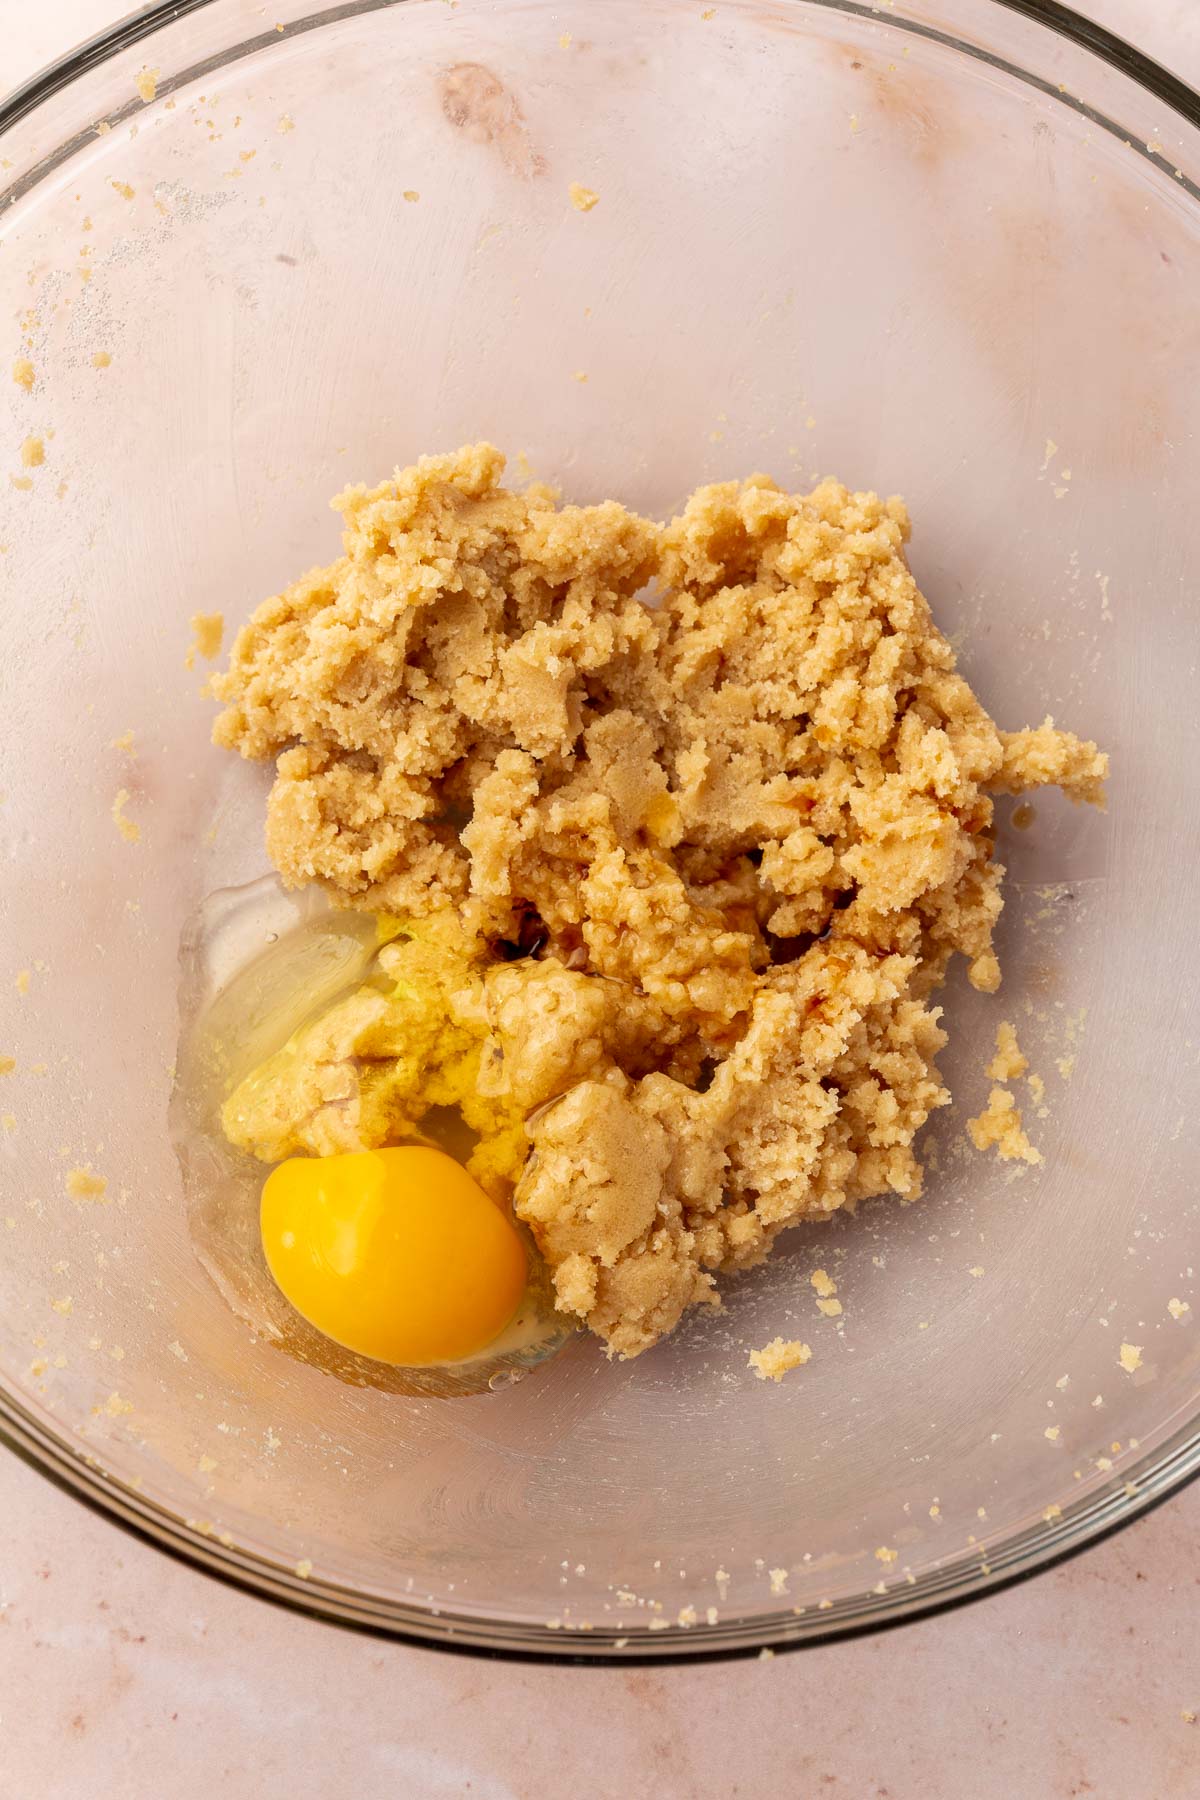 A glass mixing bowl of a creamed butter and brown sugar mixture next to a raw egg before mixing together.